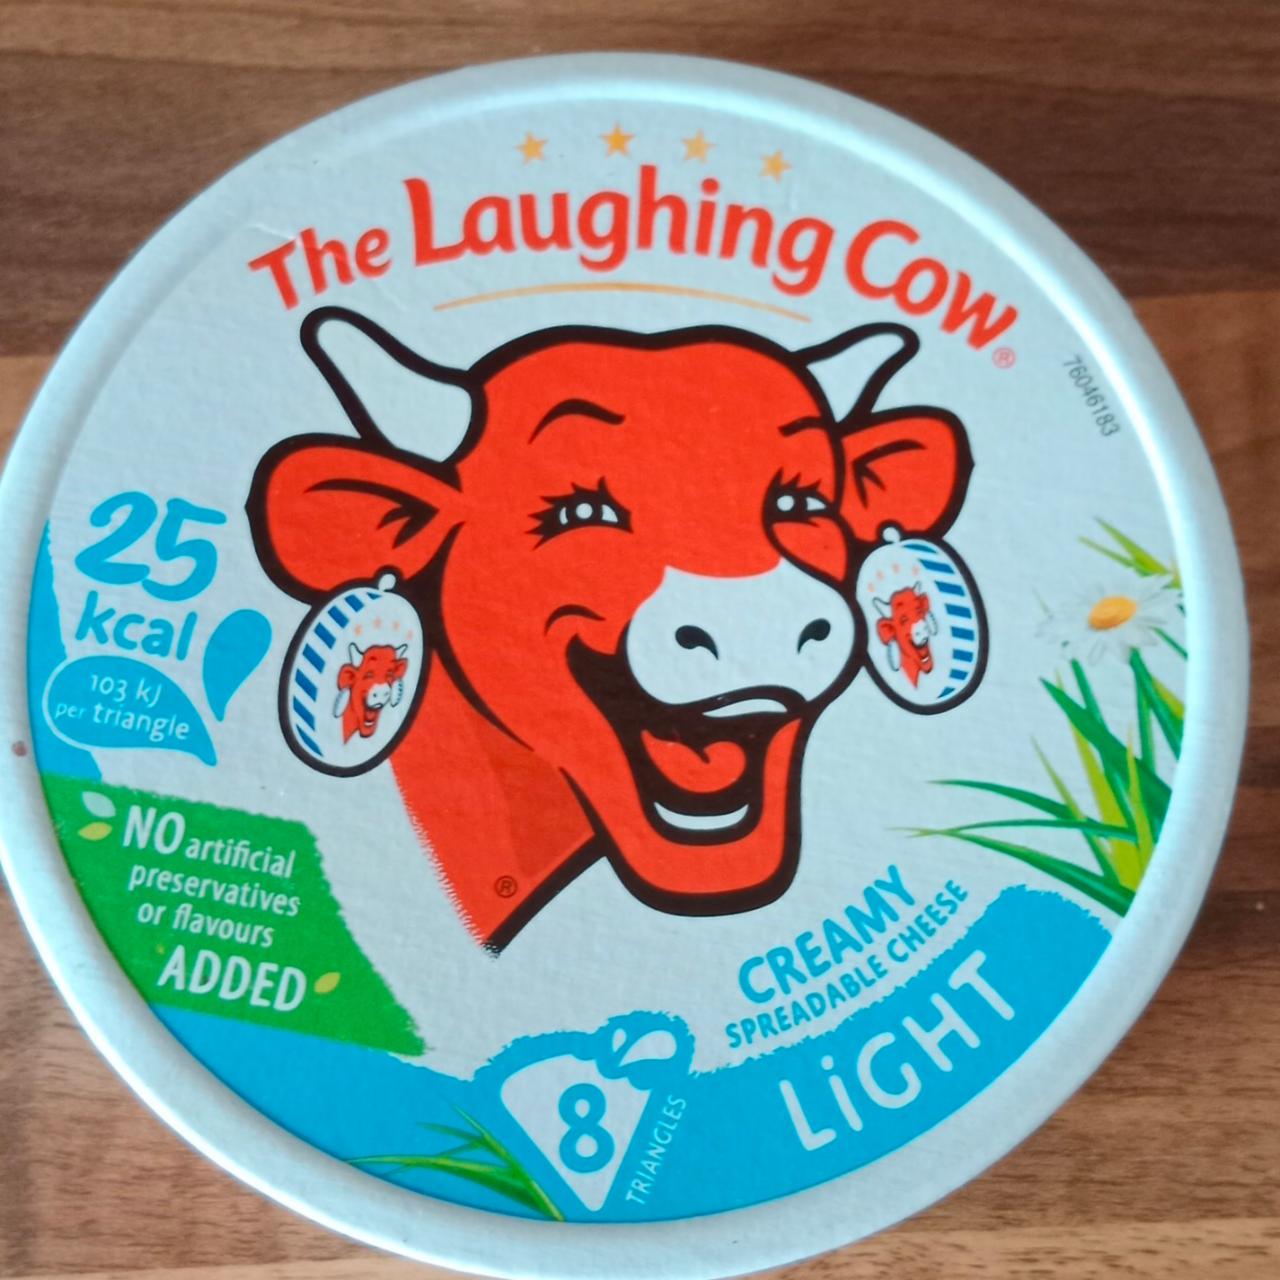 Fotografie - Light Creamy Spreadable Cheese Laughing Cow